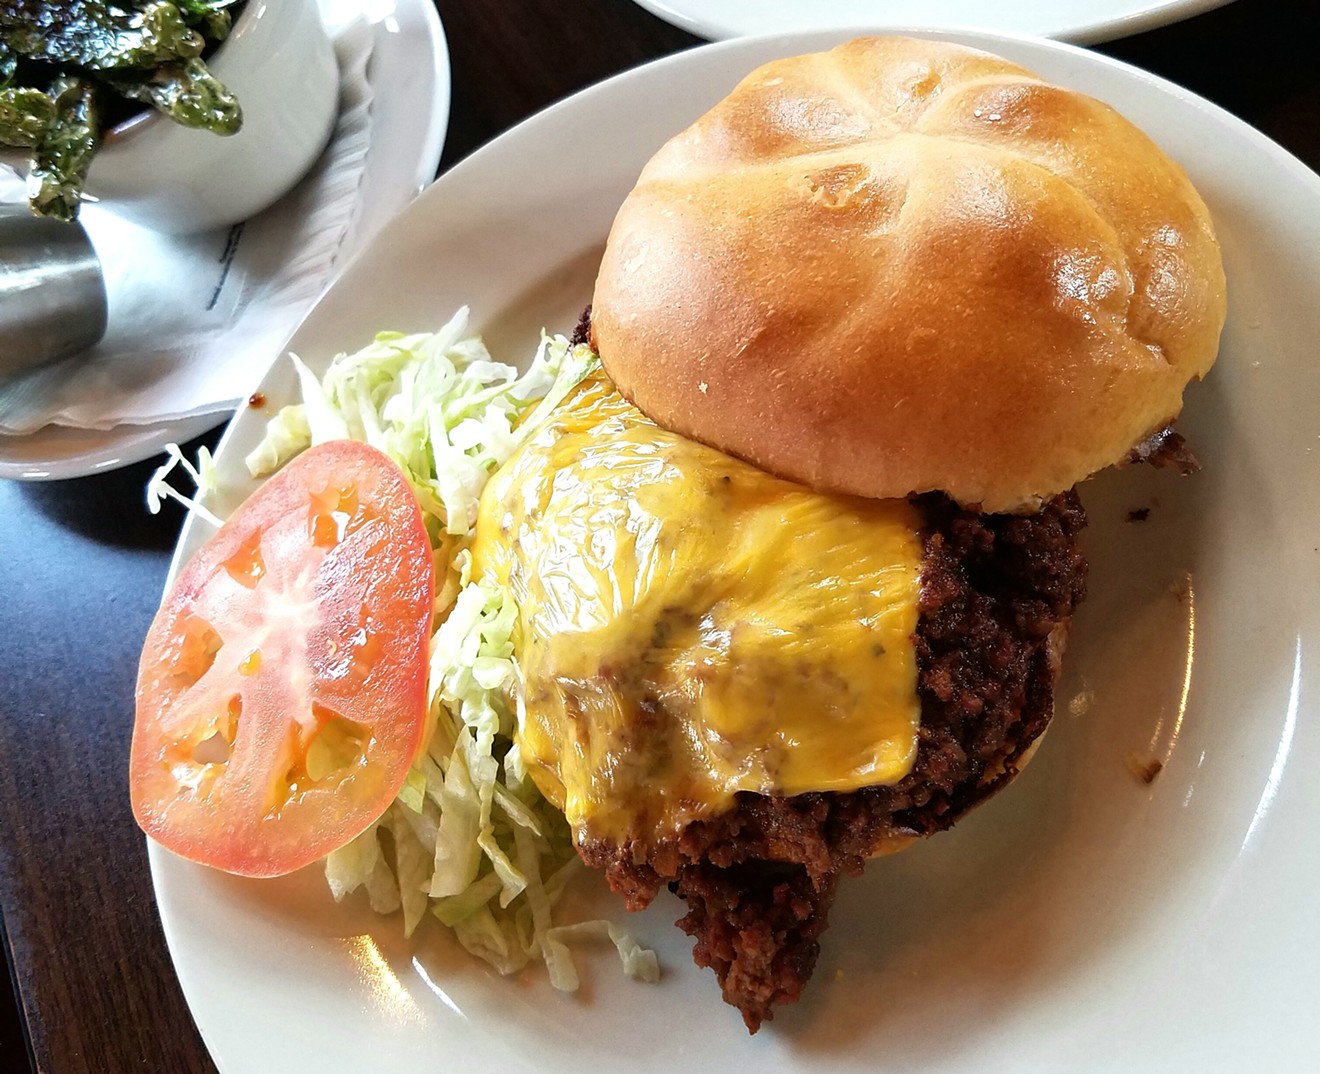 Go get the Sloppy Joe at Thunderbird Imperial Lounge. It's comfort food at its finest.